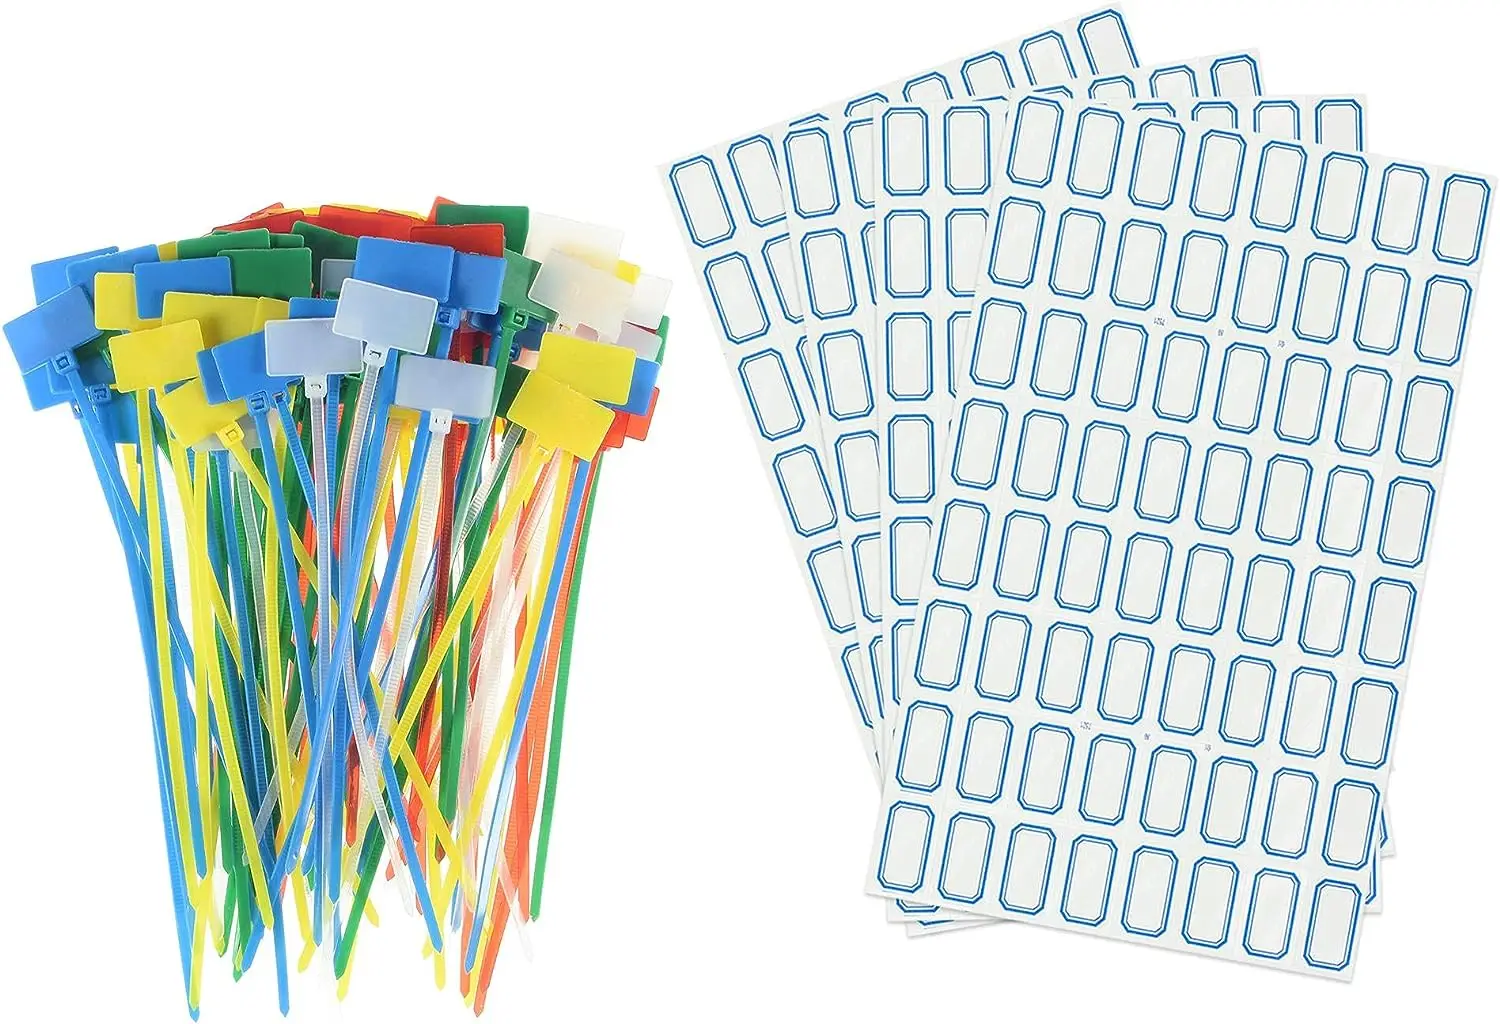 

Tcenofoxy 100pcs Nylon Cable Ties Tags Label Marker Self-Locking for Marking Organizing White/Red/Green/Blue/Yellow